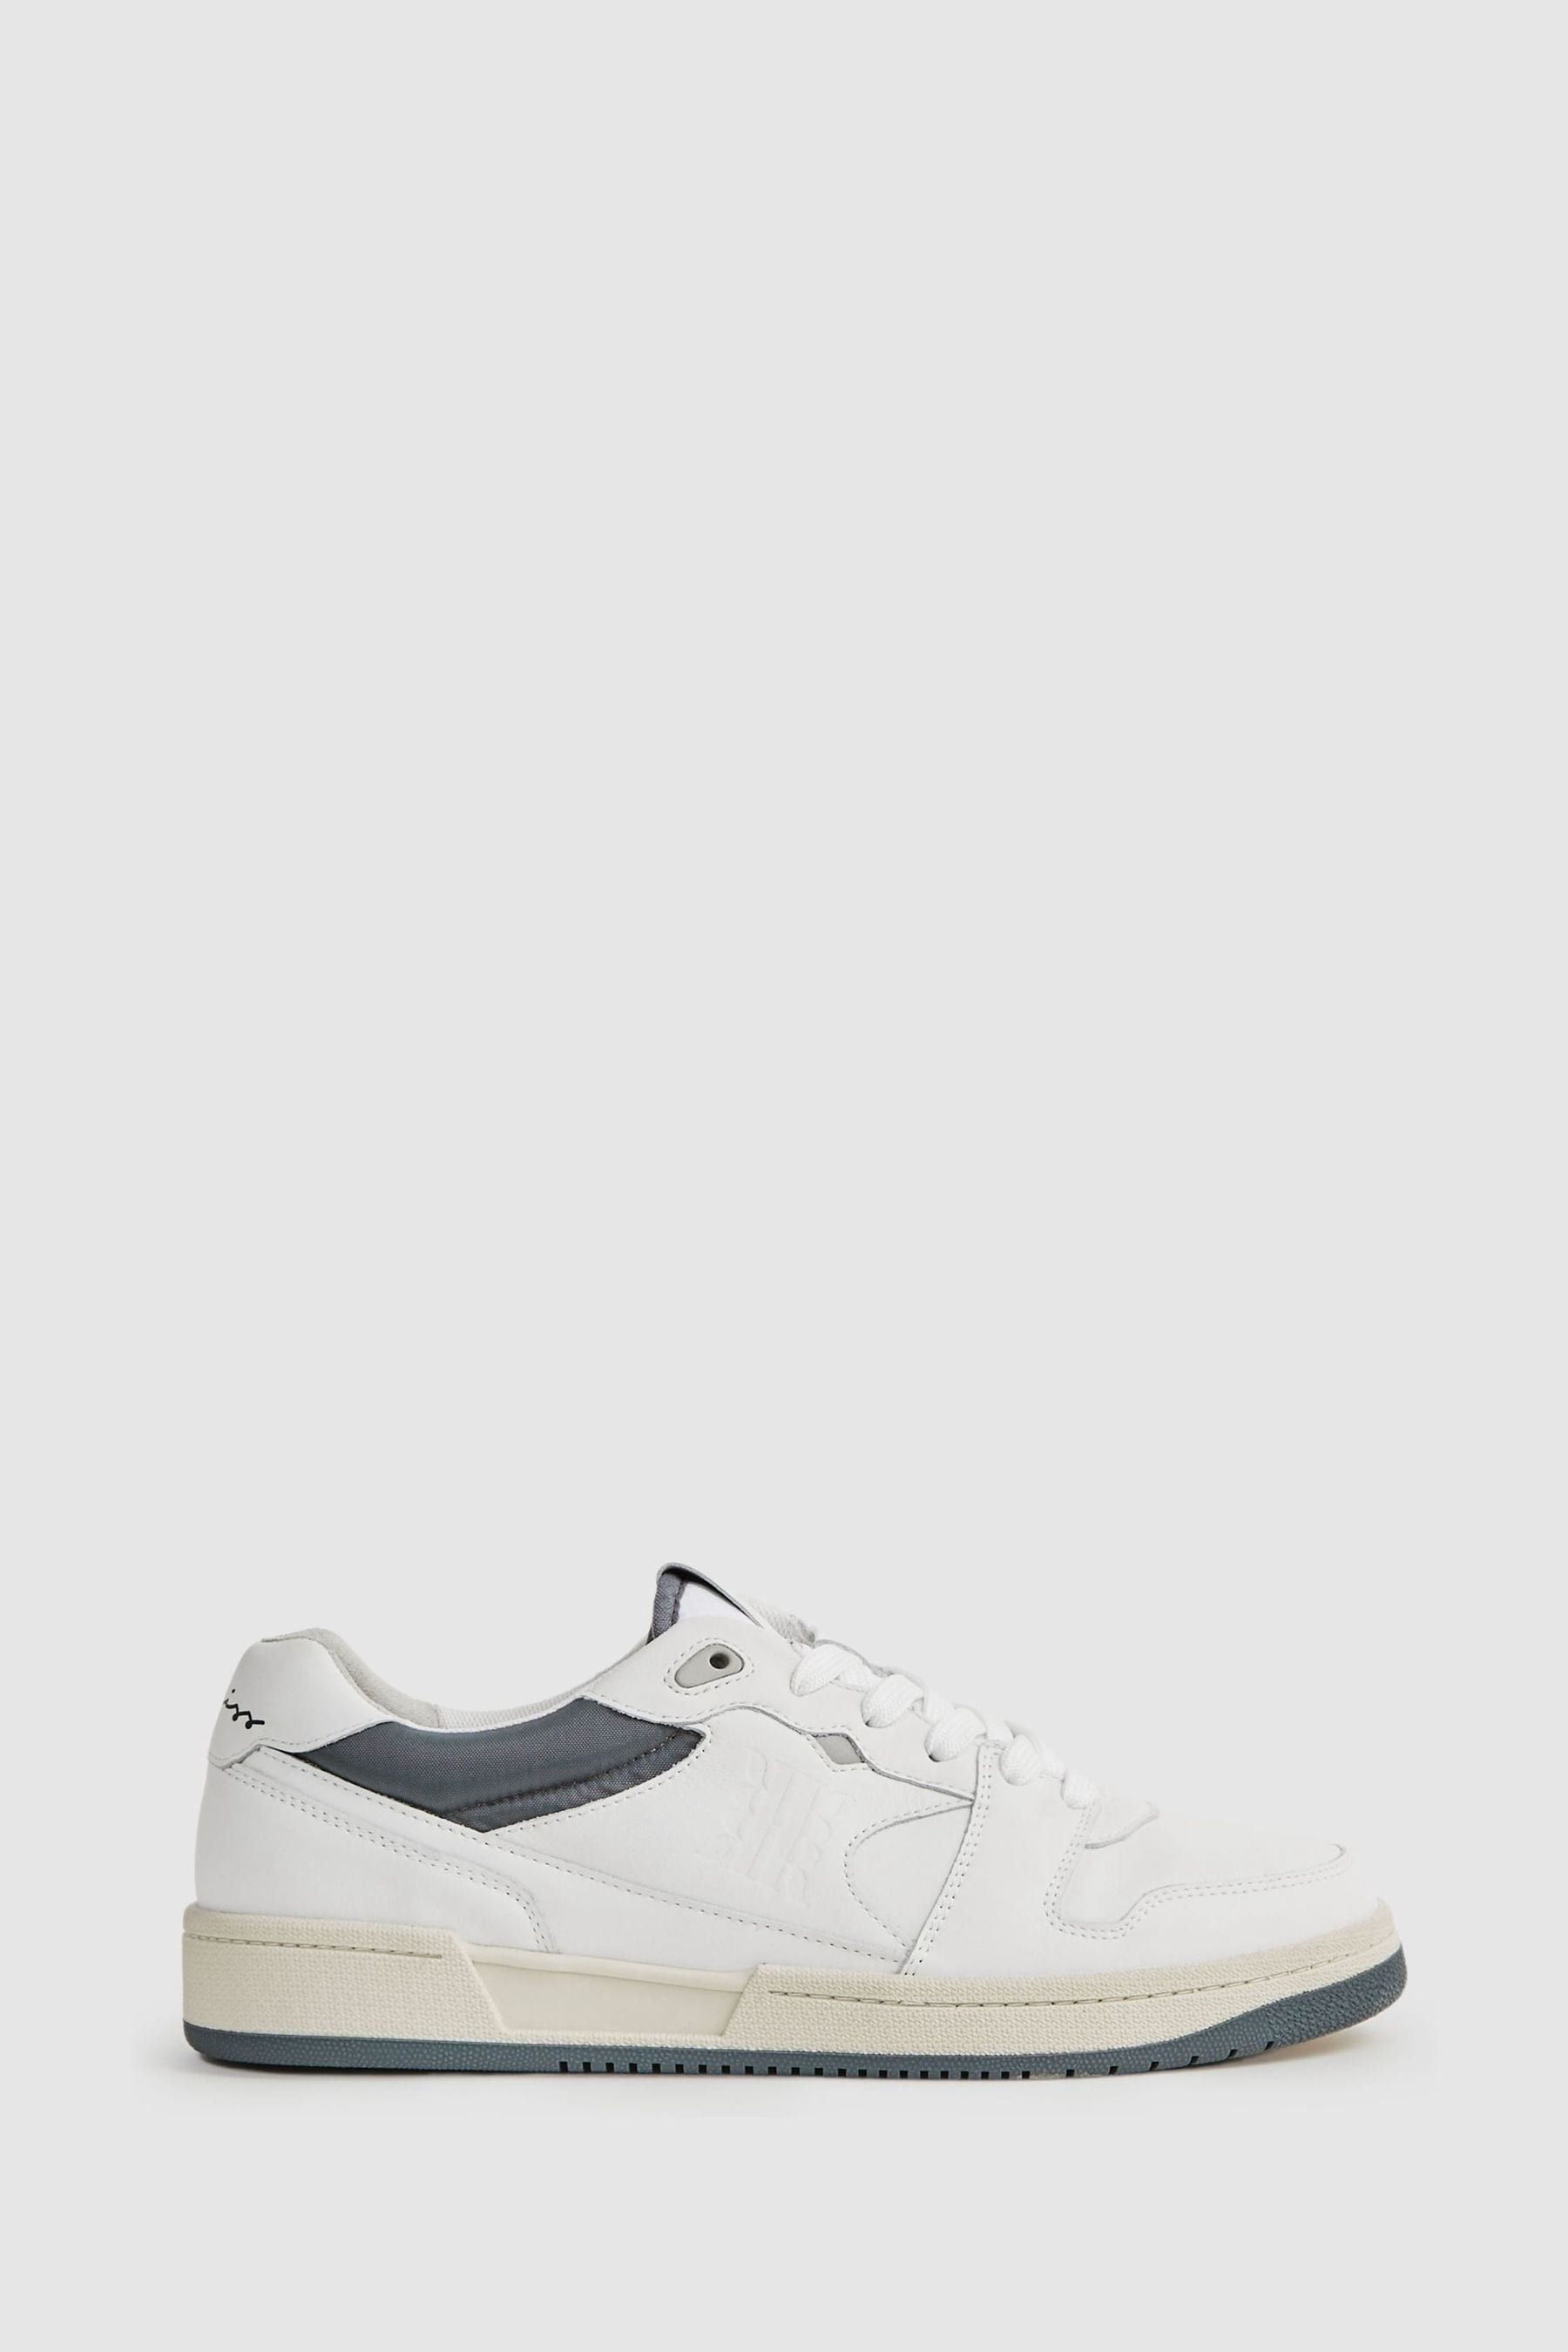 Reiss Astor - White Leather Lace-up Trainers, Us 12